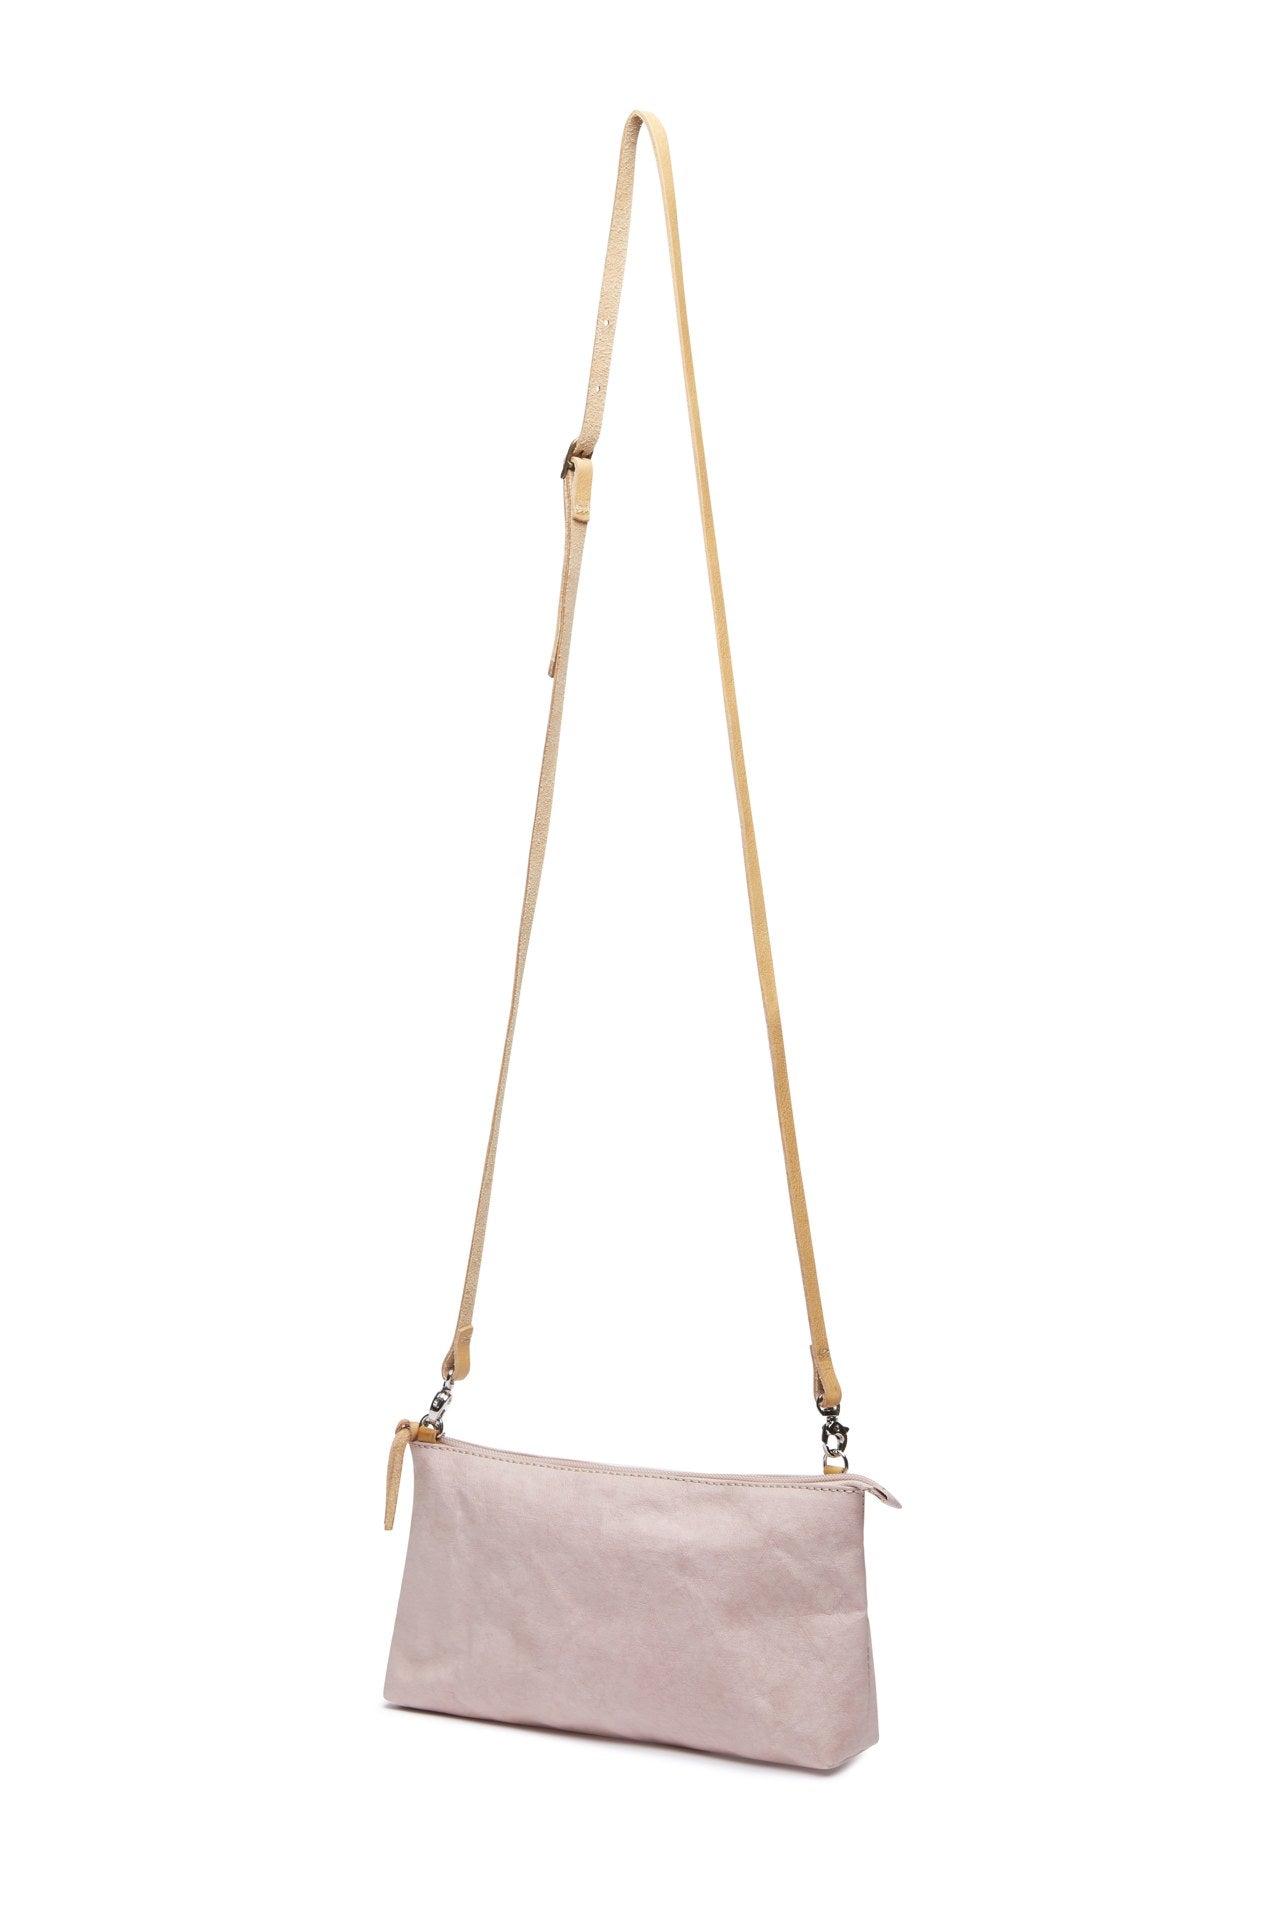 A pale pink washable paper small zip top handbag is shown with a long tan washable paper strap.